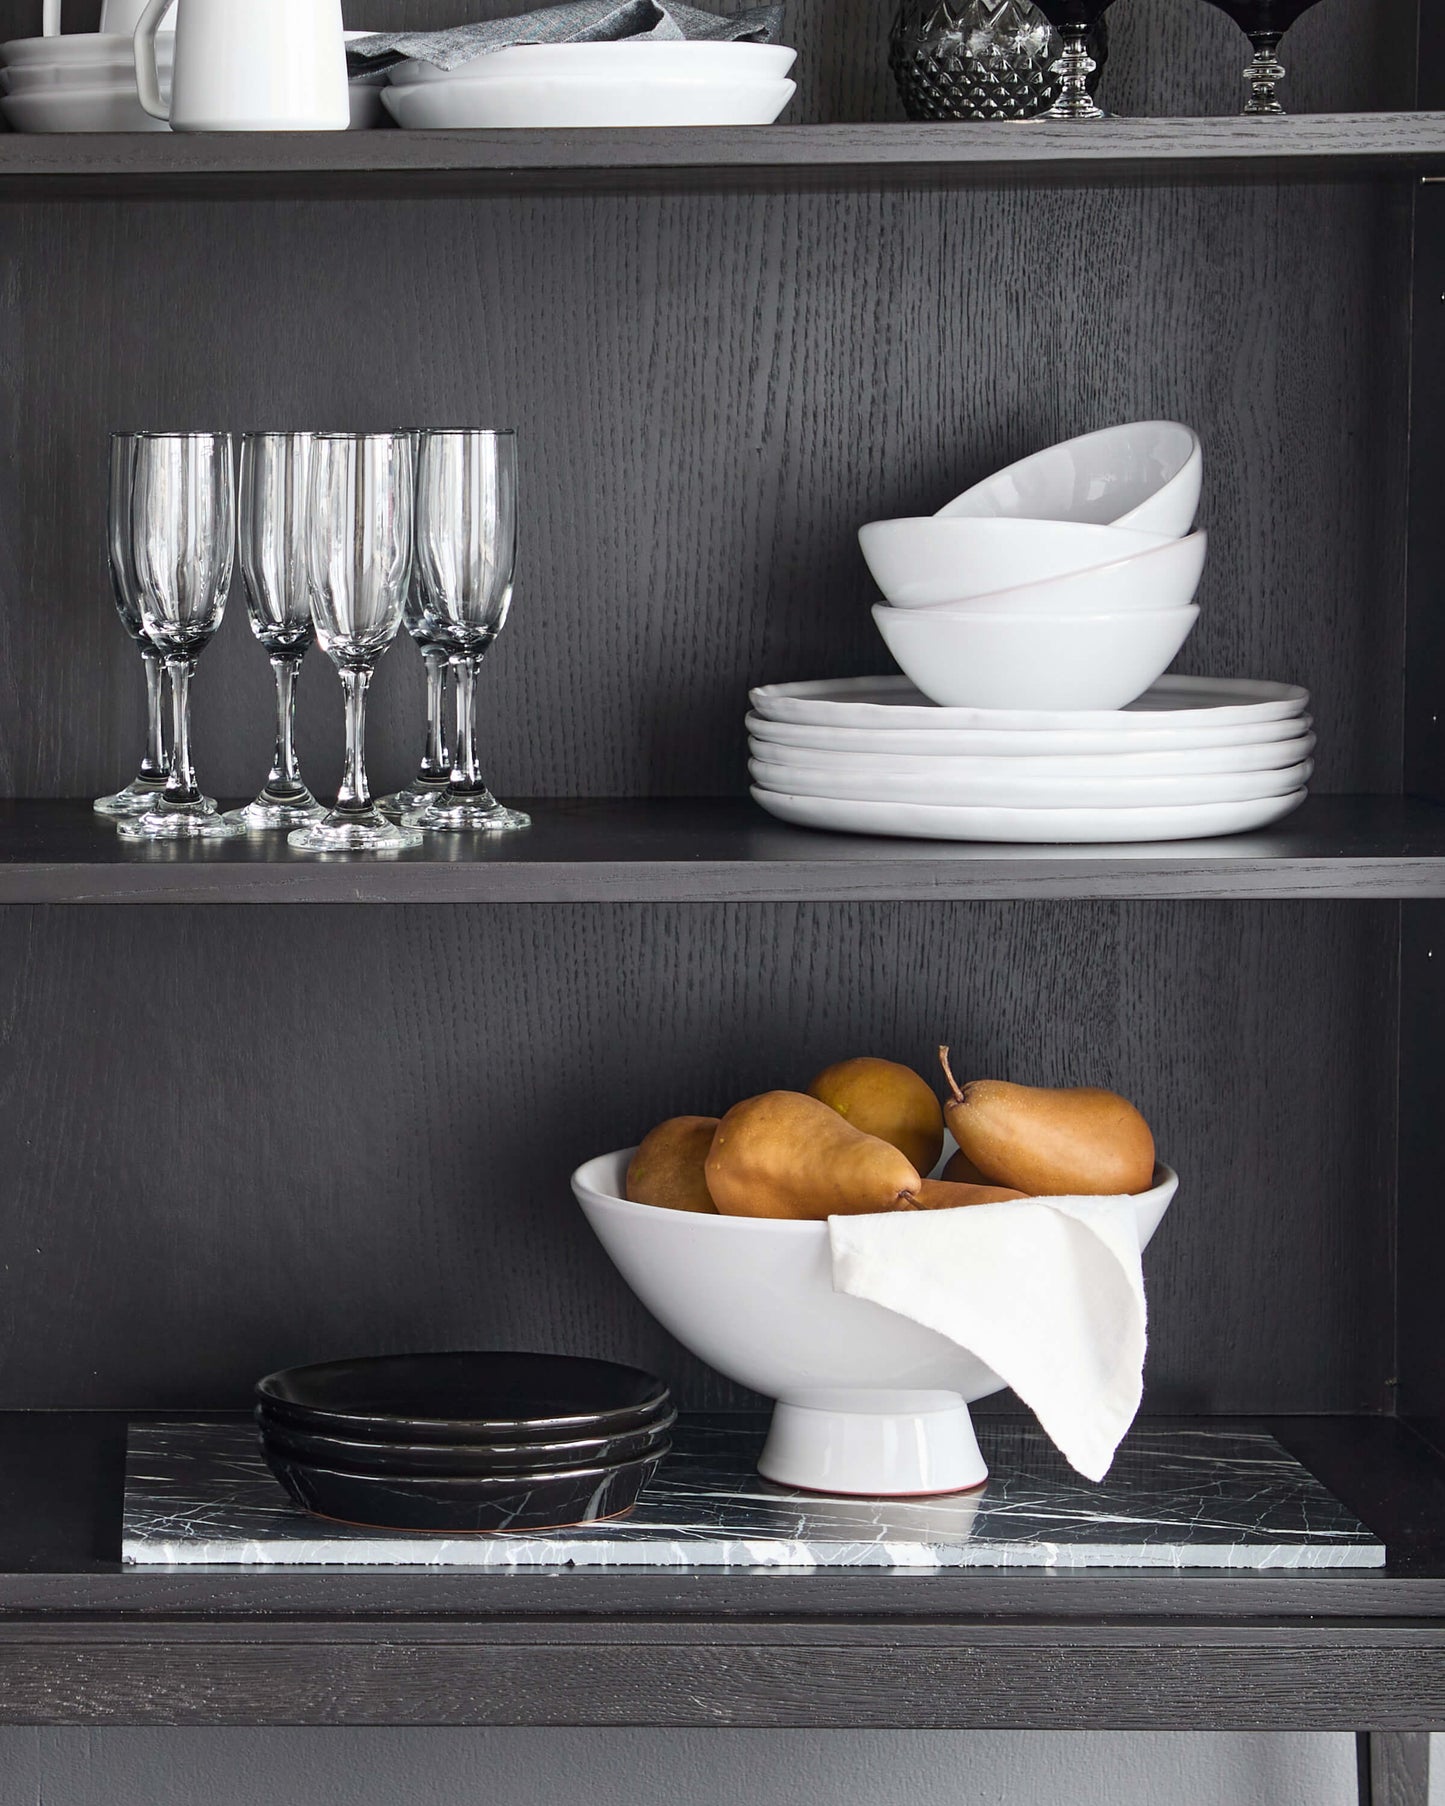 
                  
                    Modern hutch with ceramic dinnerware and white pedestal bowl filled with golden pears.
                  
                